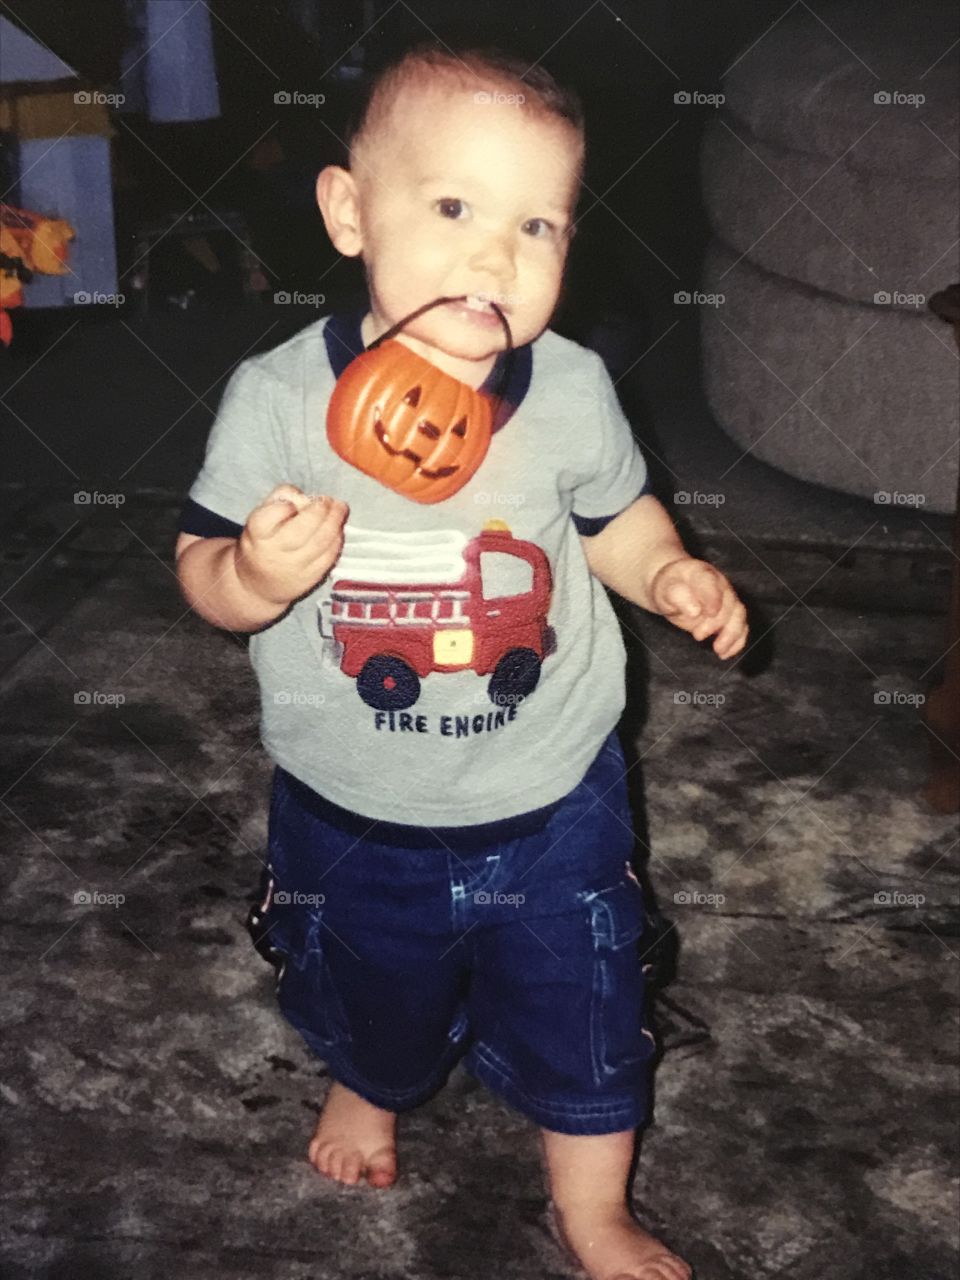 Toddler boy wearing a fire engine shirt and holding a little pumpkin bucket with his teeth.